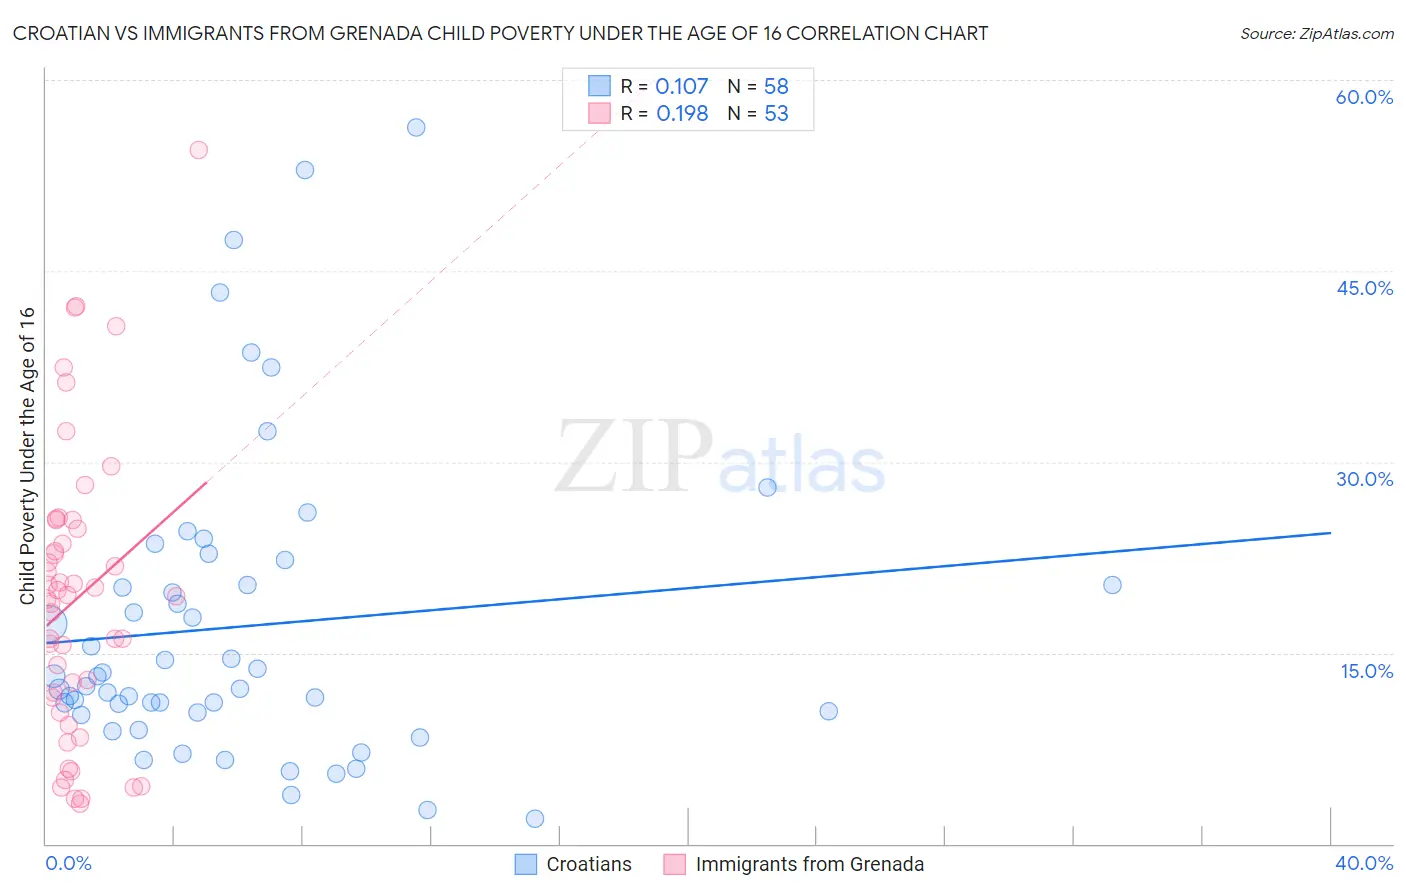 Croatian vs Immigrants from Grenada Child Poverty Under the Age of 16